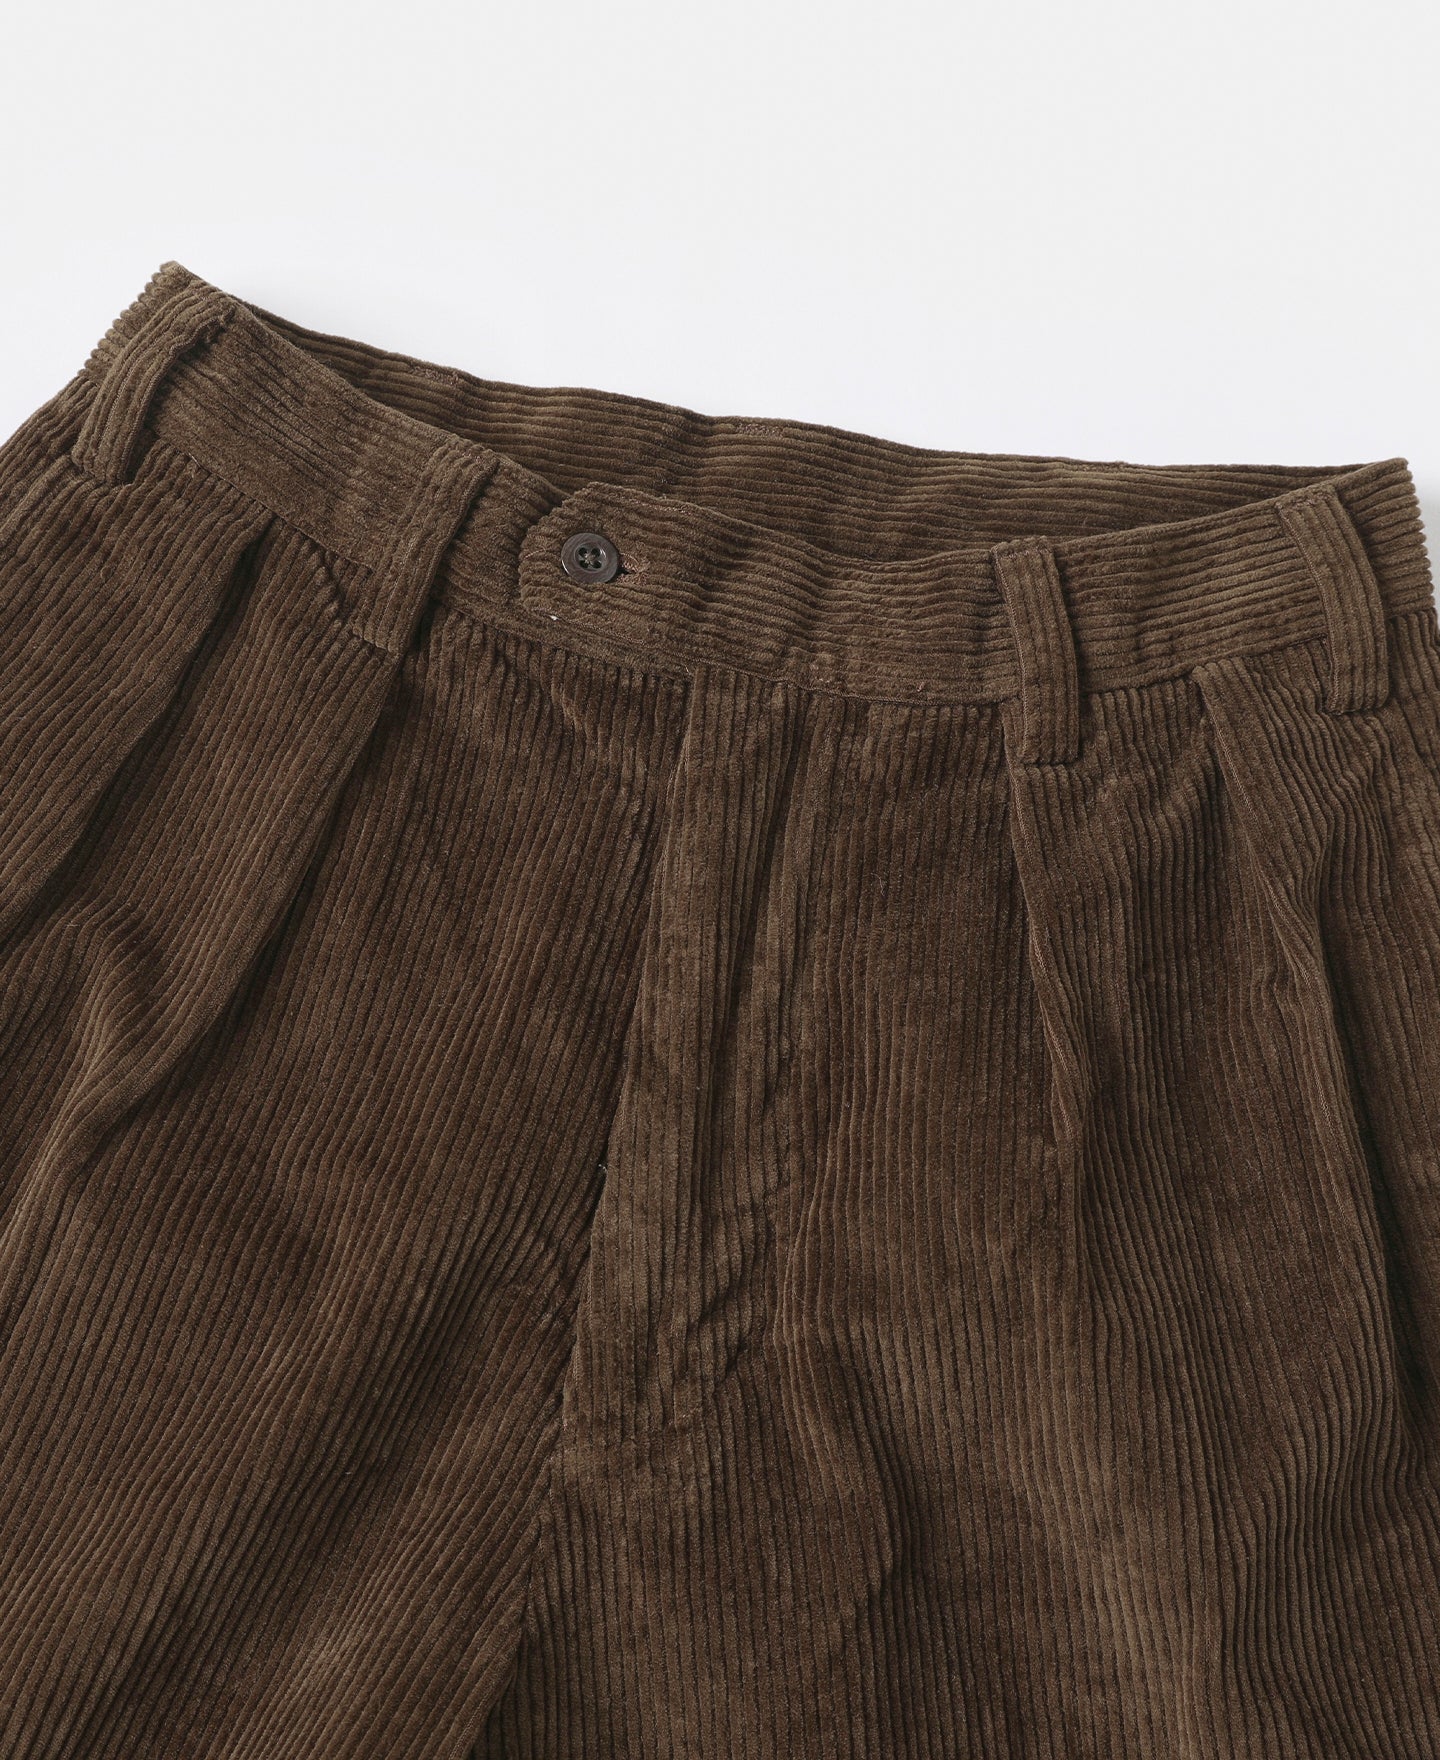 Alimens & Gentle Men's Corduroy Straight Fit Flat Front Casual Pant-Brown  02, 28W x 30L at  Men's Clothing store